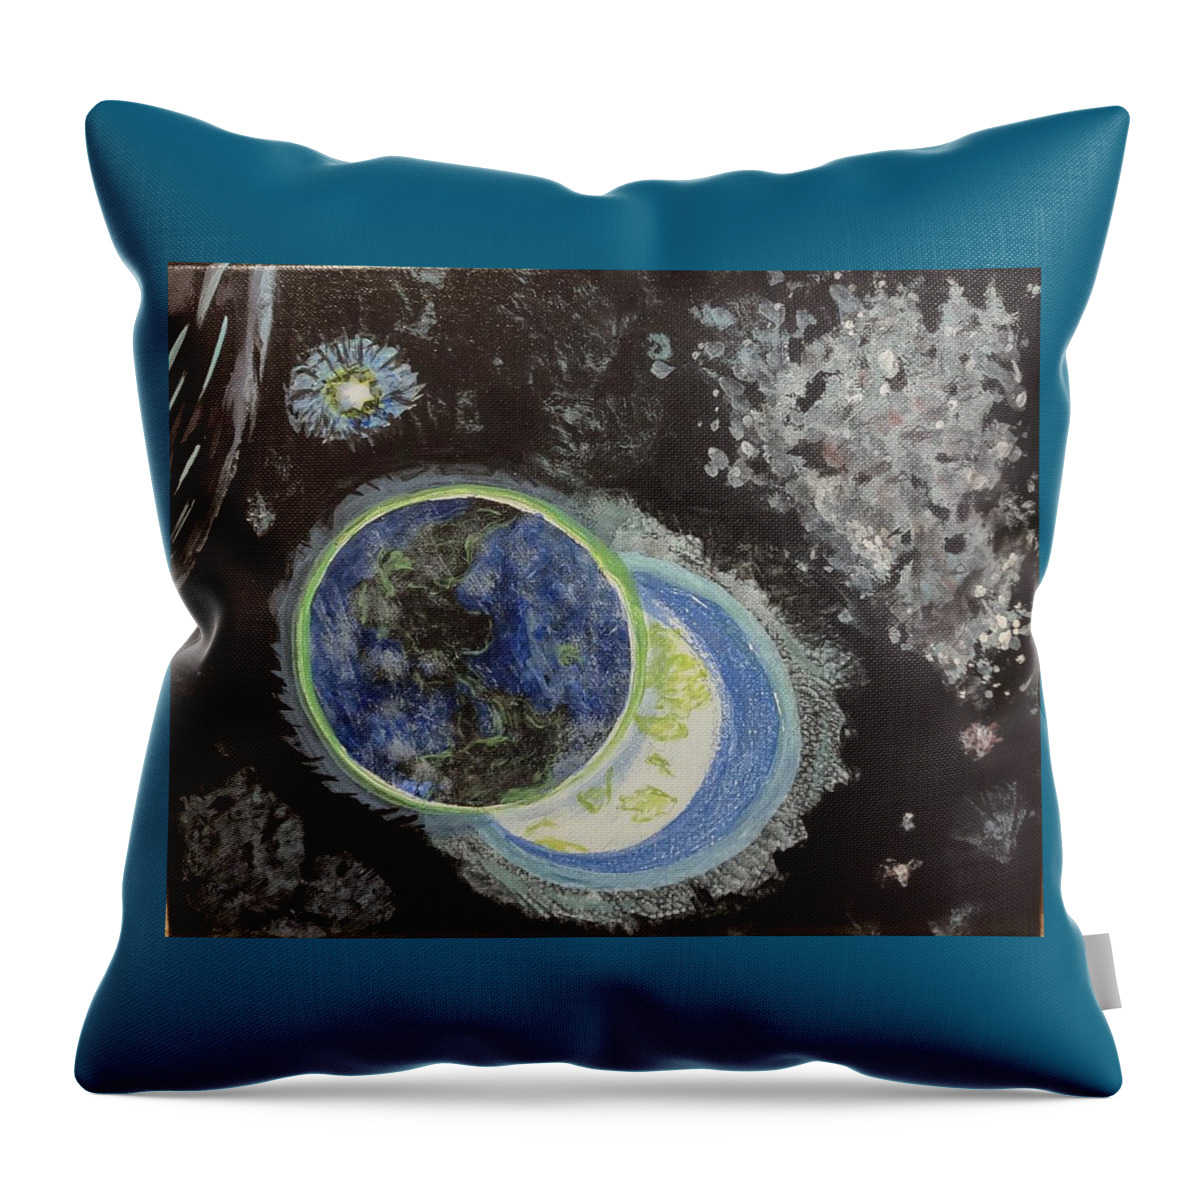 Space Throw Pillow featuring the painting Space Odessey by Suzanne Berthier